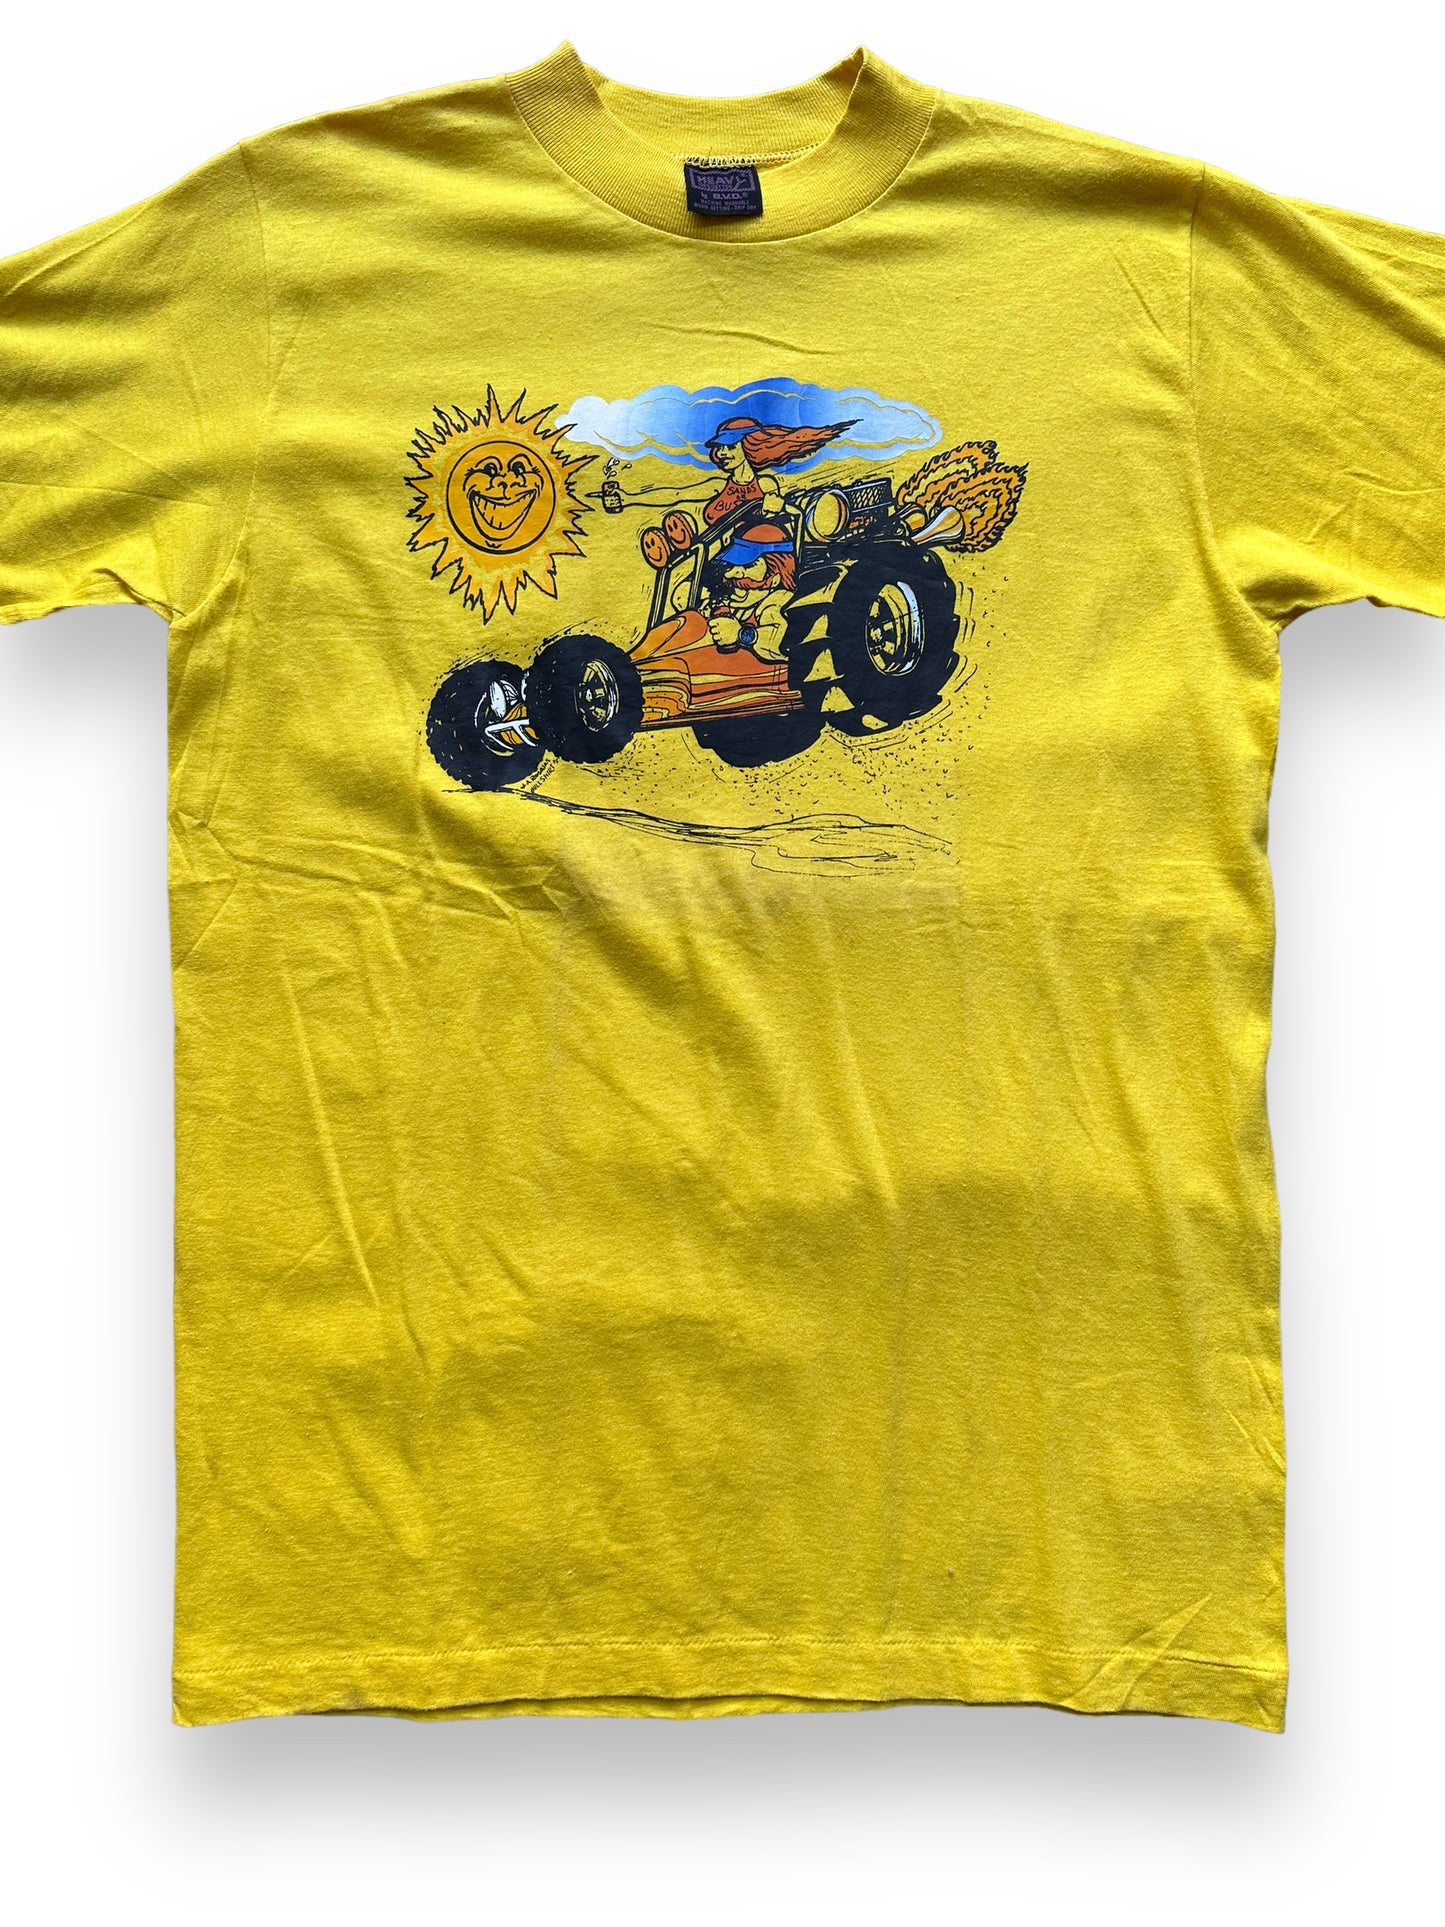 Front Detail on Vintage Dune Buggy Graphic Tee SZ L | Vintage Bull Shirt Graphic T-Shirts Seattle | Barn Owl Vintage Tees Seattle